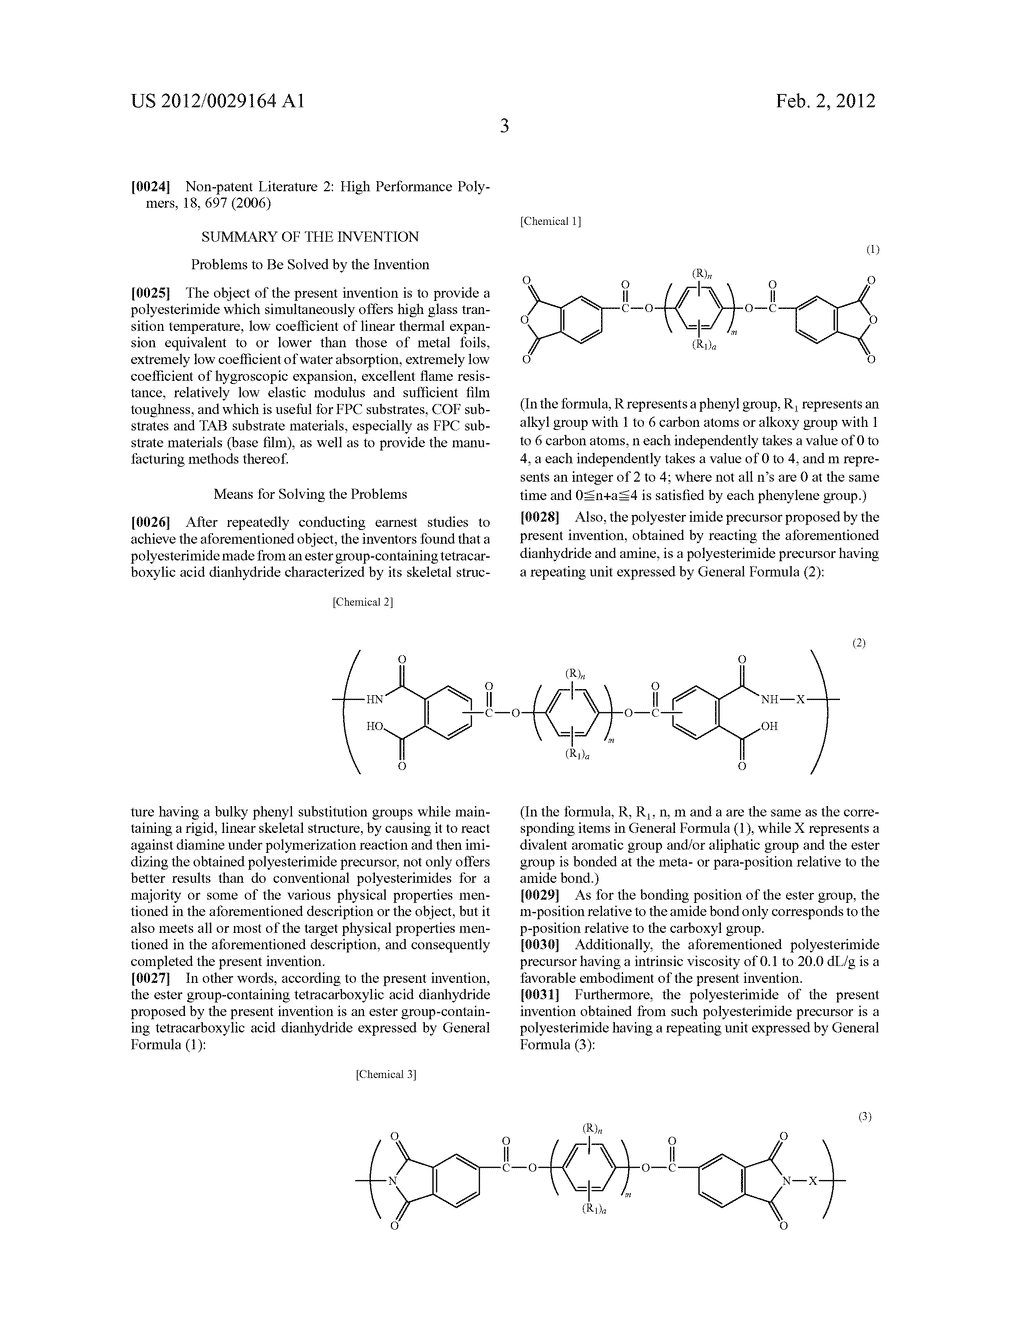 ESTER GROUP-CONTAINING TETRACARBOXYLIC ACID DIANHYDRIDE, POLYESTER     POLYIMIDE PRECURSOR, POLYESTERIMIDE, AND METHODS FOR PRODUCING SAME - diagram, schematic, and image 17